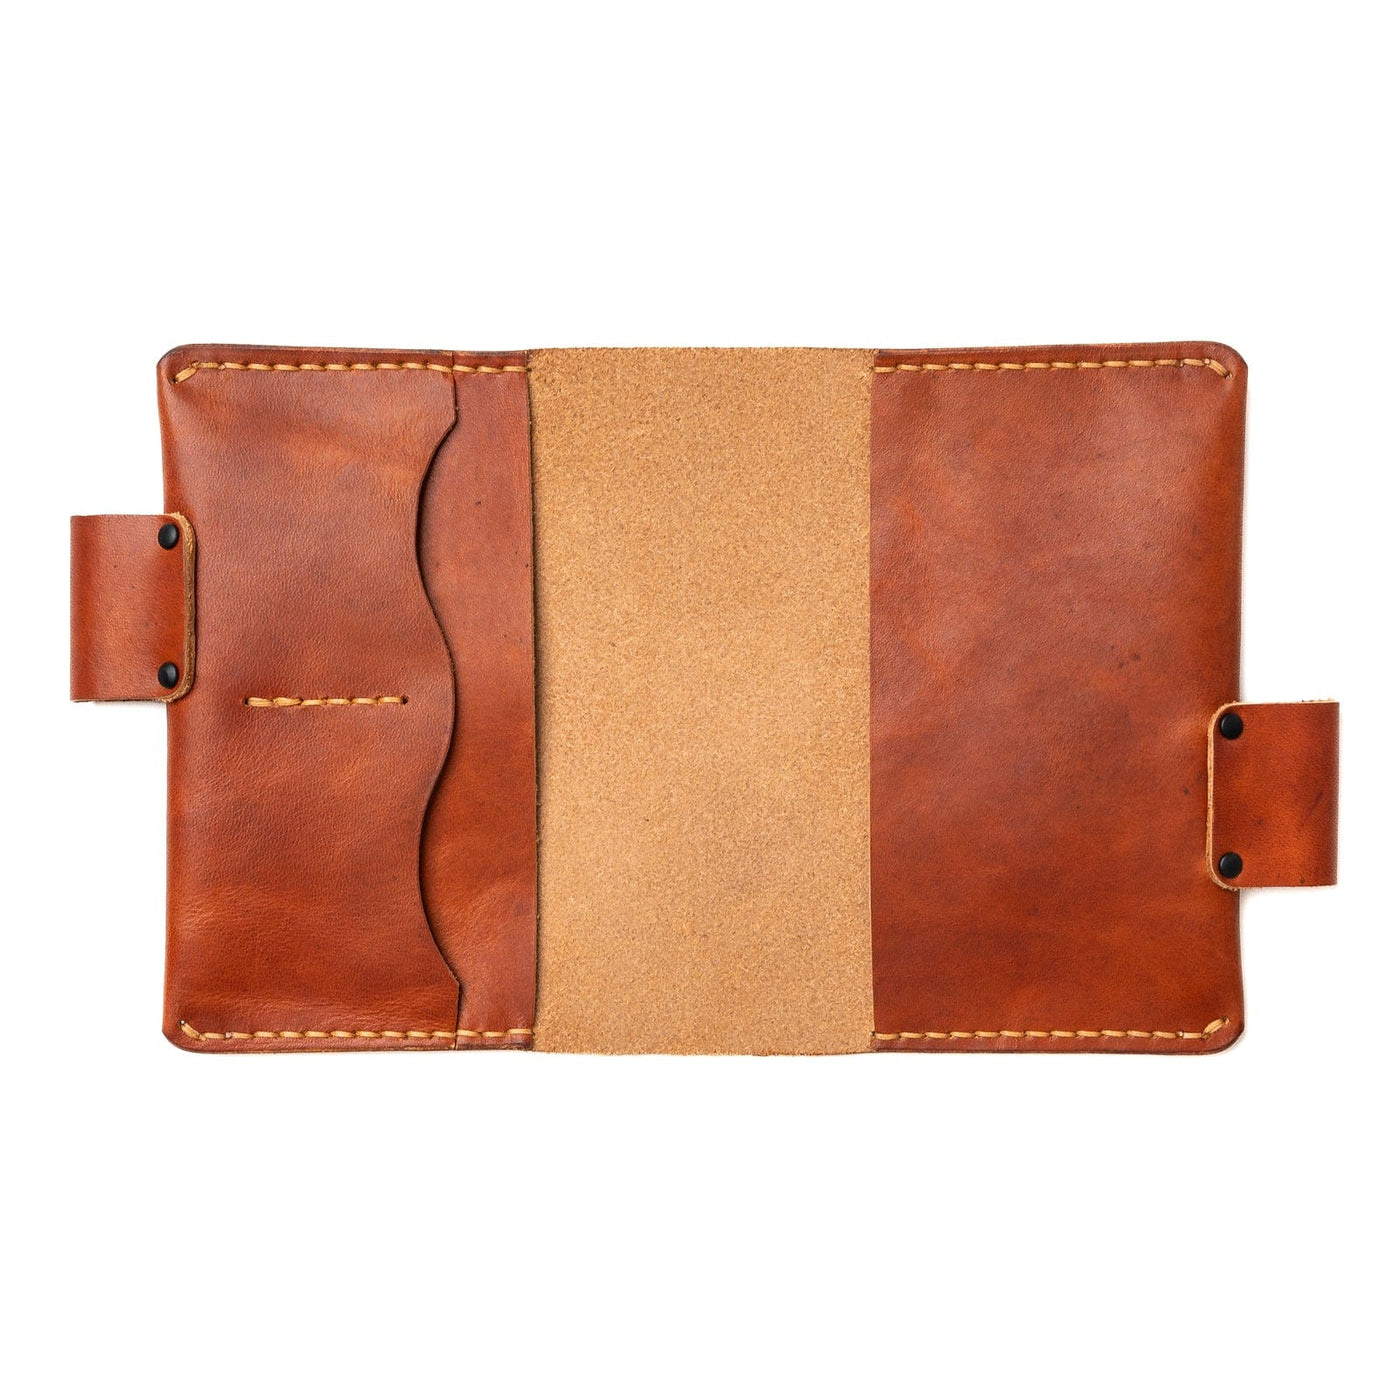 Leather A6 Notebook Cover - English Tan Popov Leather